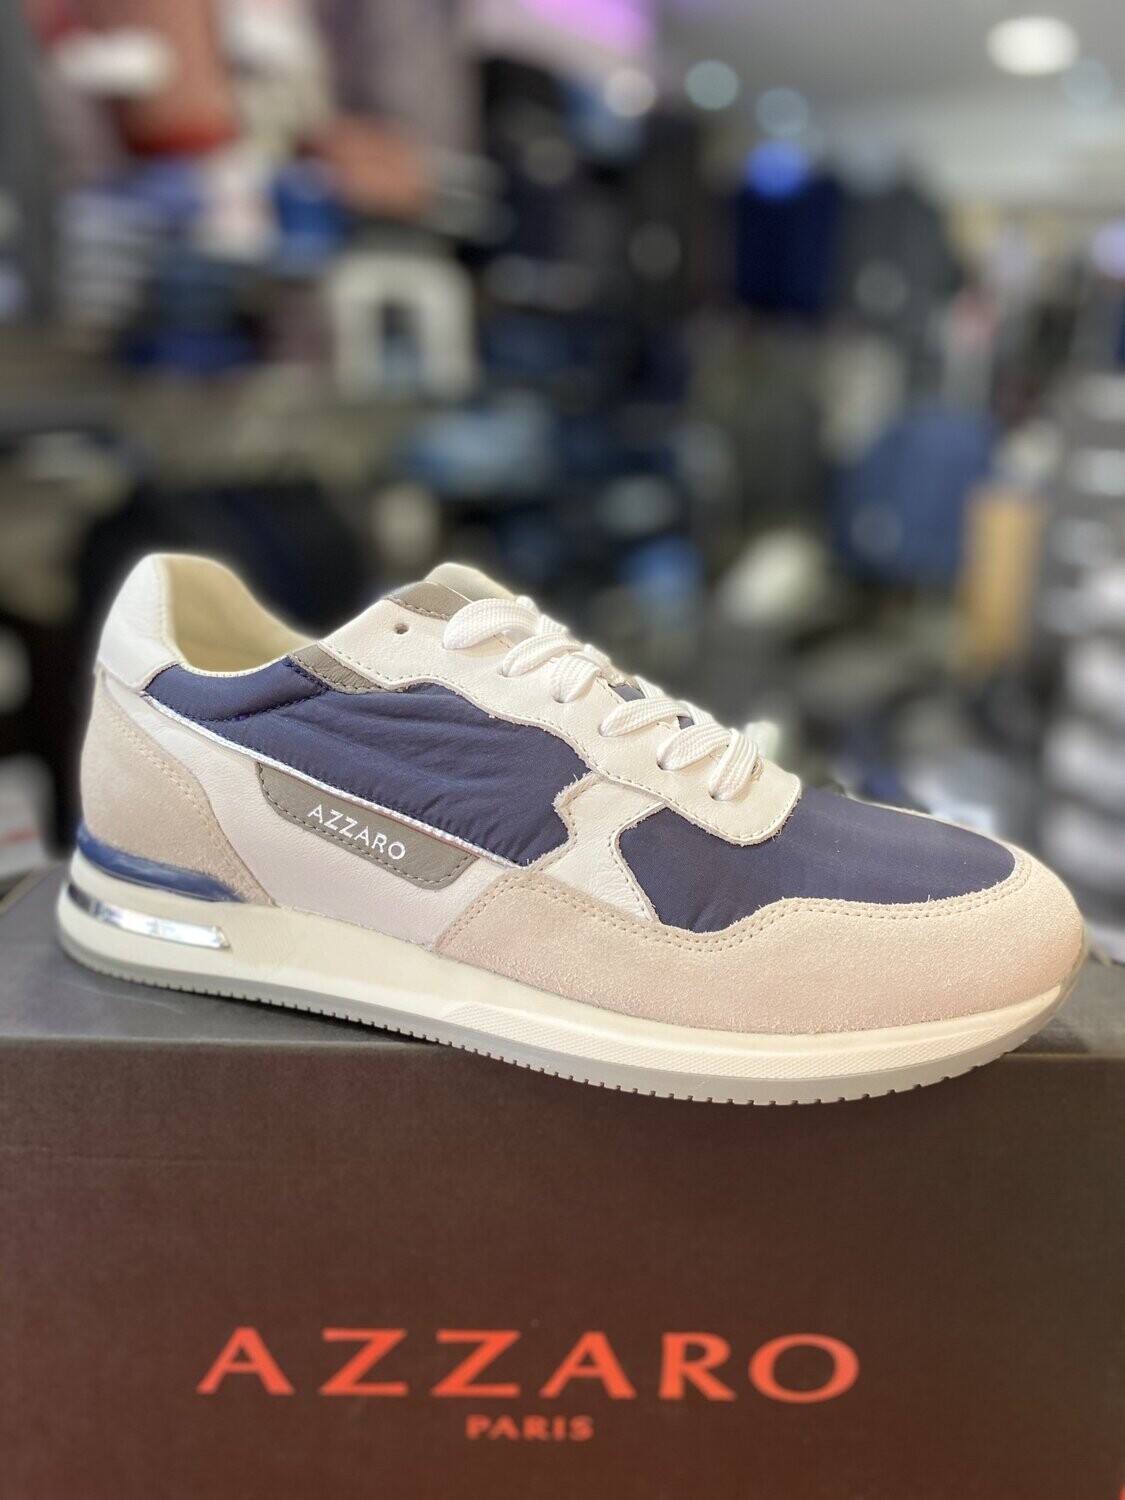 BASKET AZZARO - MAGASIN CHAUSSURE OUTLET HOMME À NICE